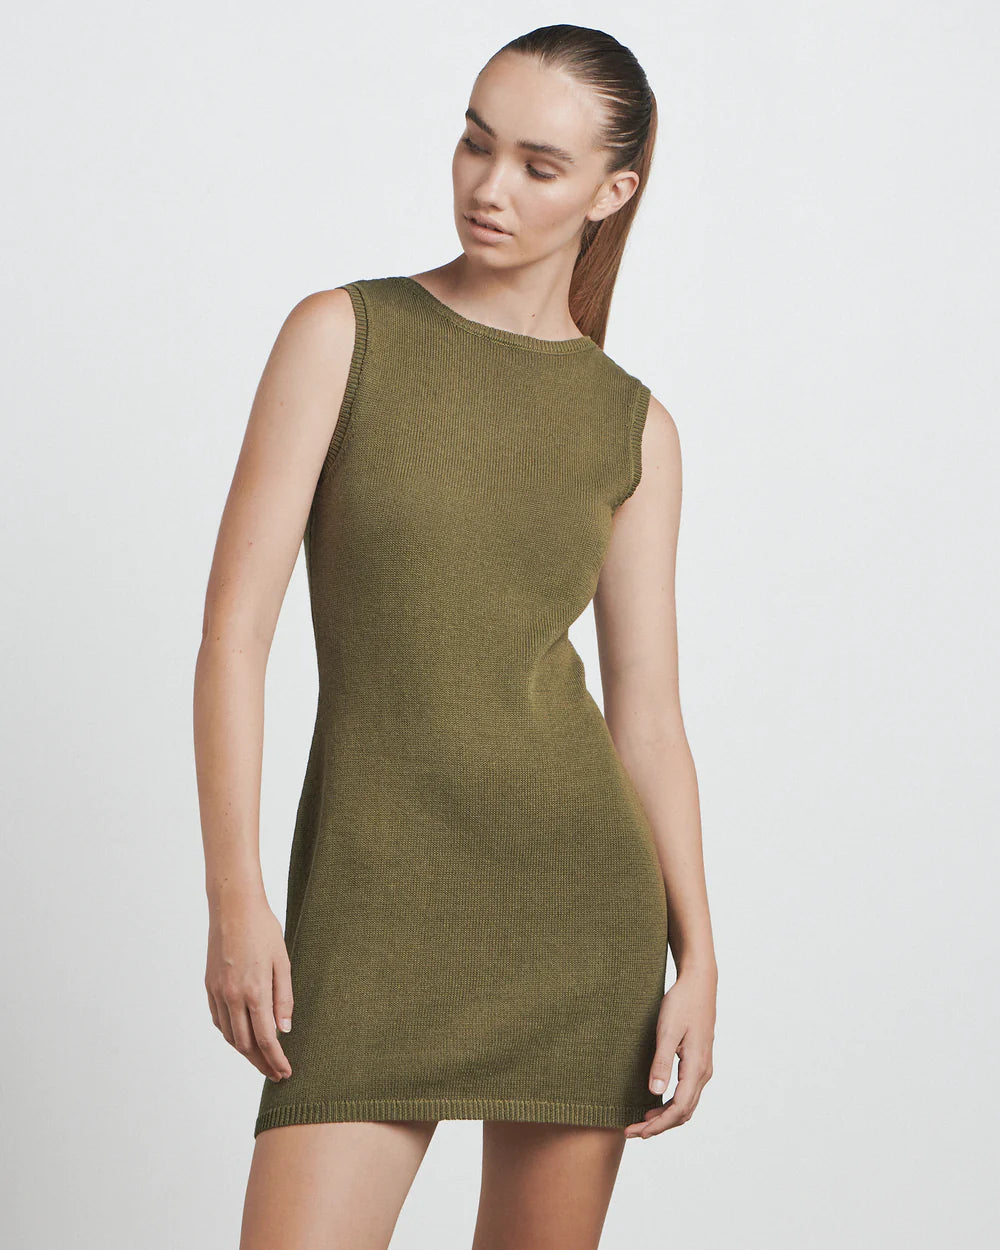 the knitted mini dress | nutmeg | bare by charlie holiday